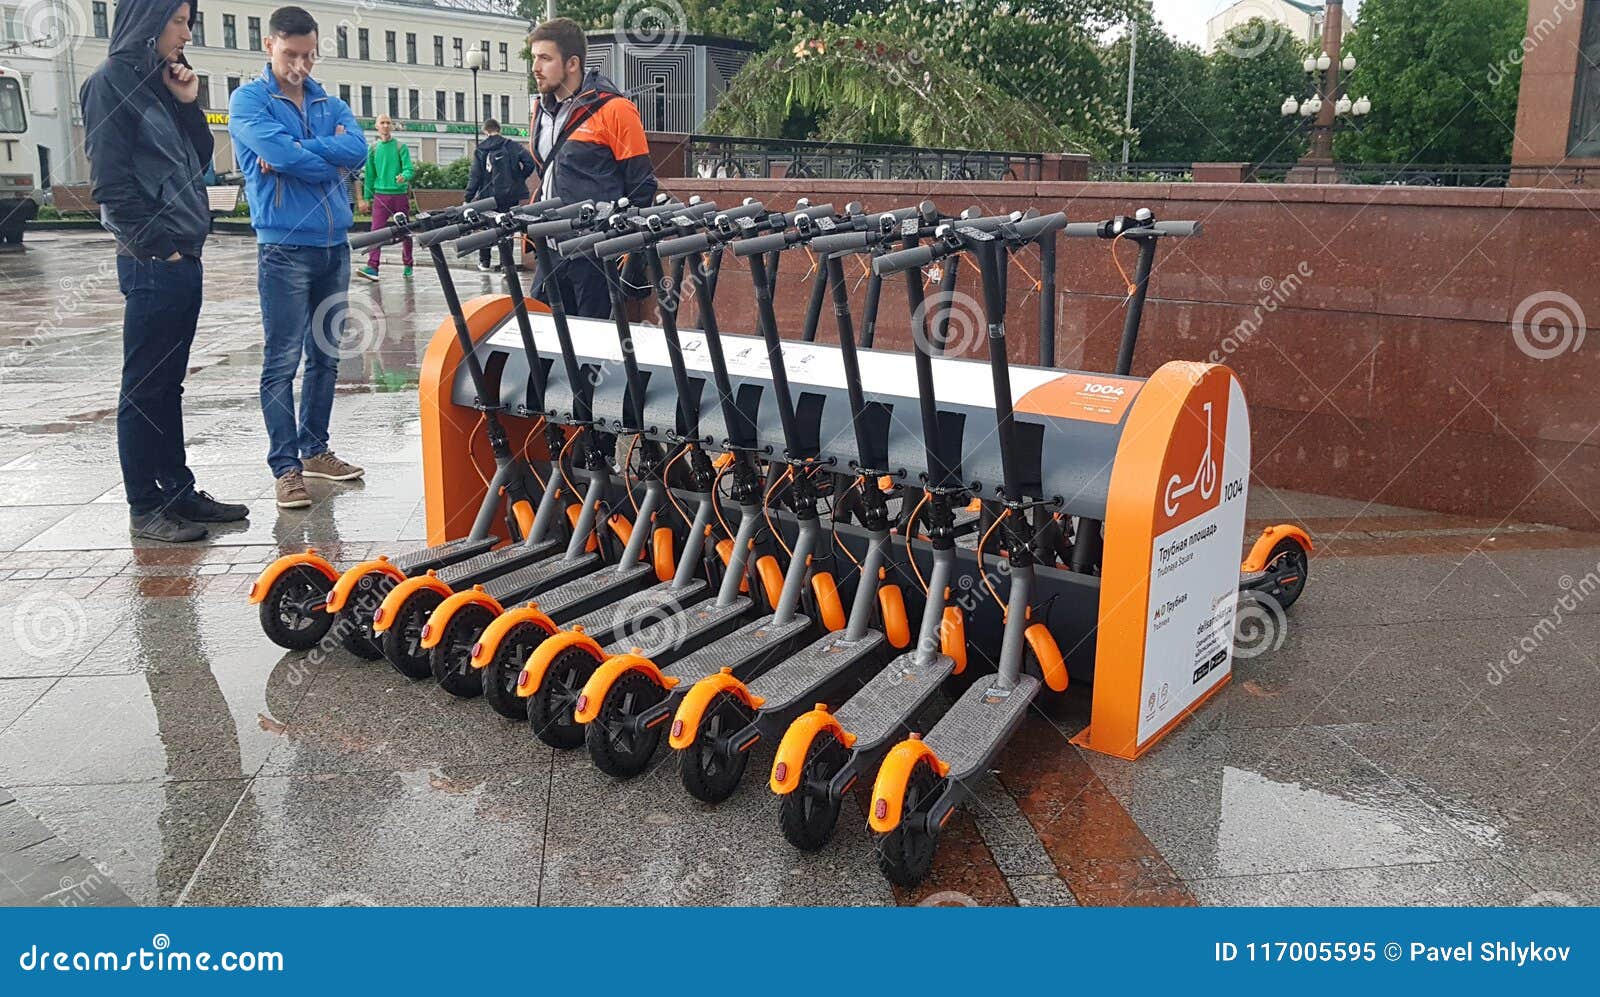 may-moscow-russia-electric-kick-scooter-sharing-parking-lot-new-sharing-business-project-started-may-moscow-electric-kick-117005595.jpg